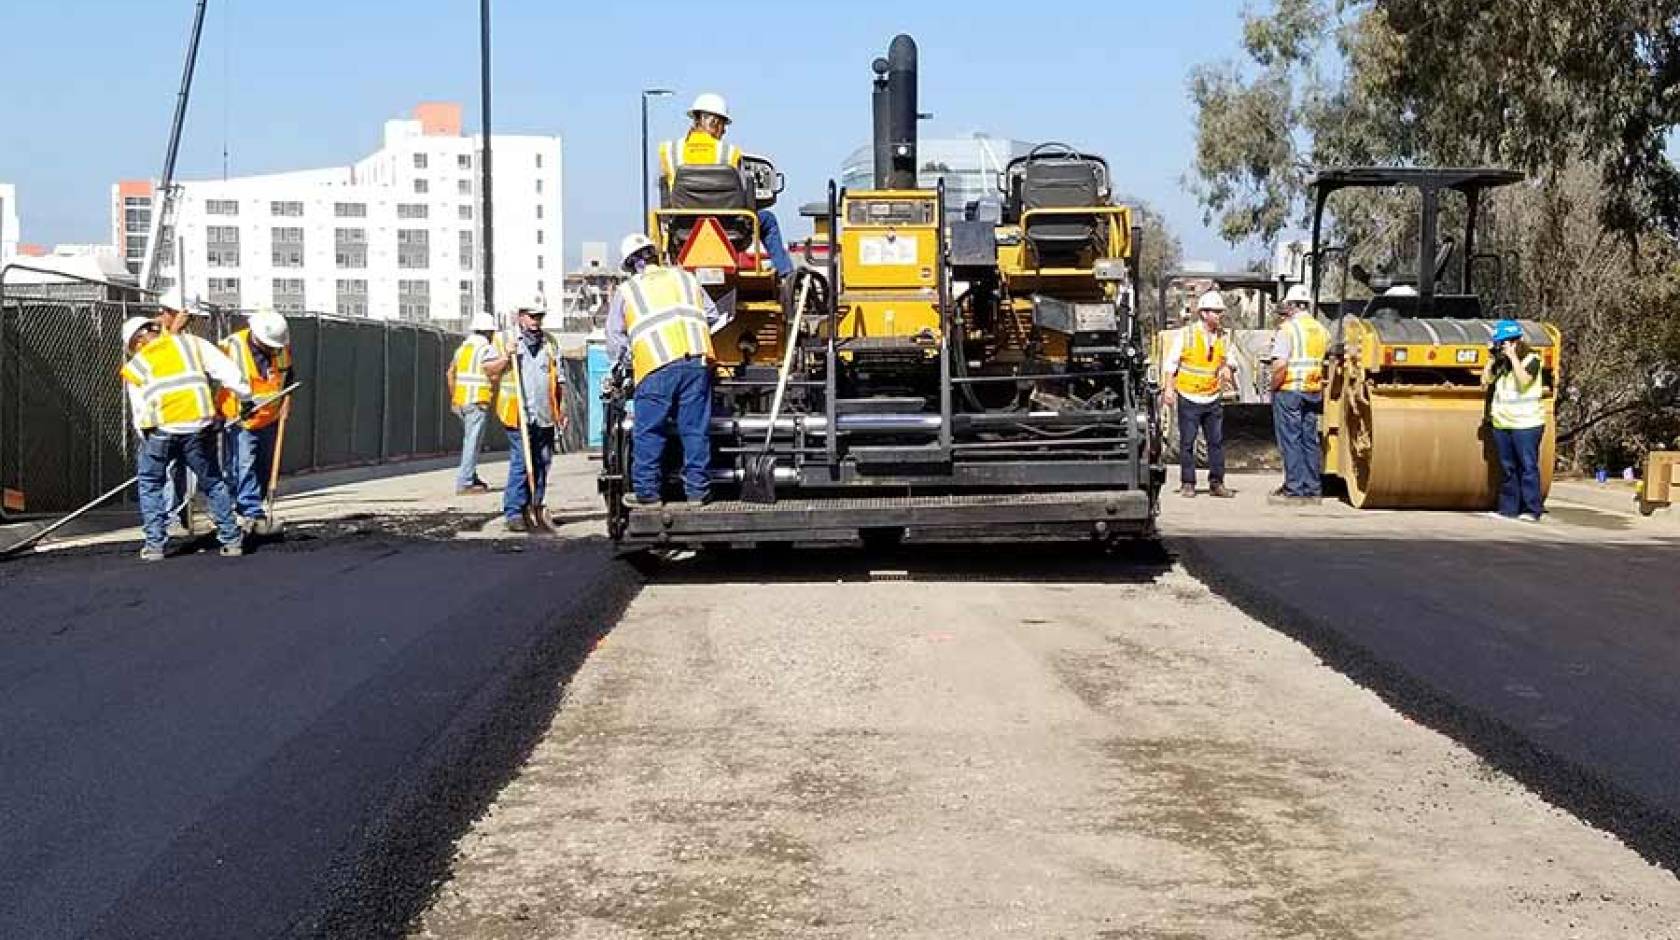 A work crew paves the road with material made of recycled plastic